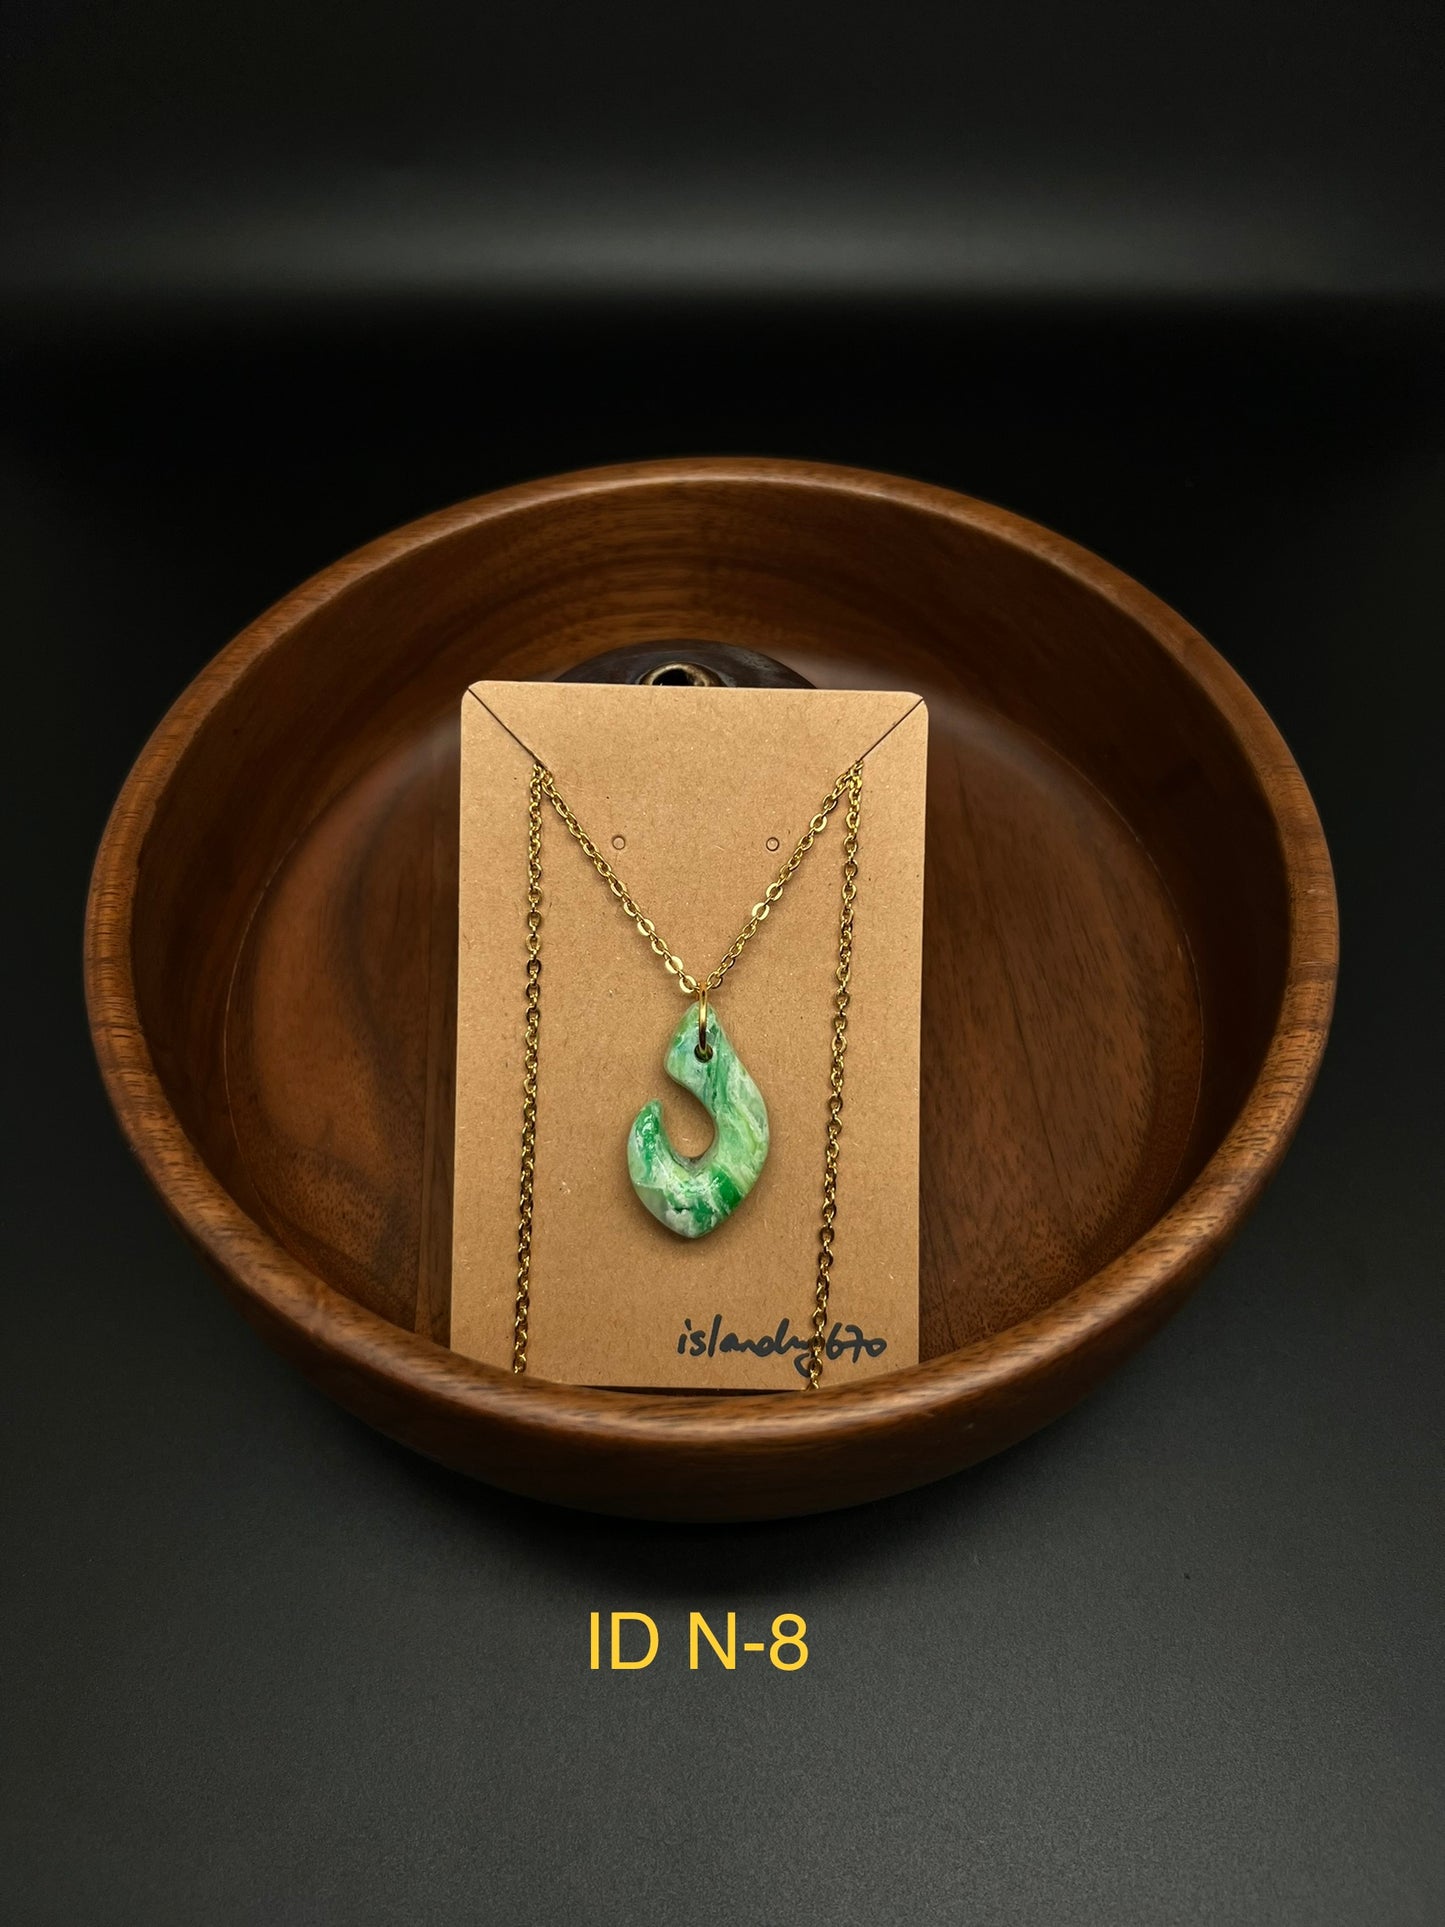 Island Dry Necklace